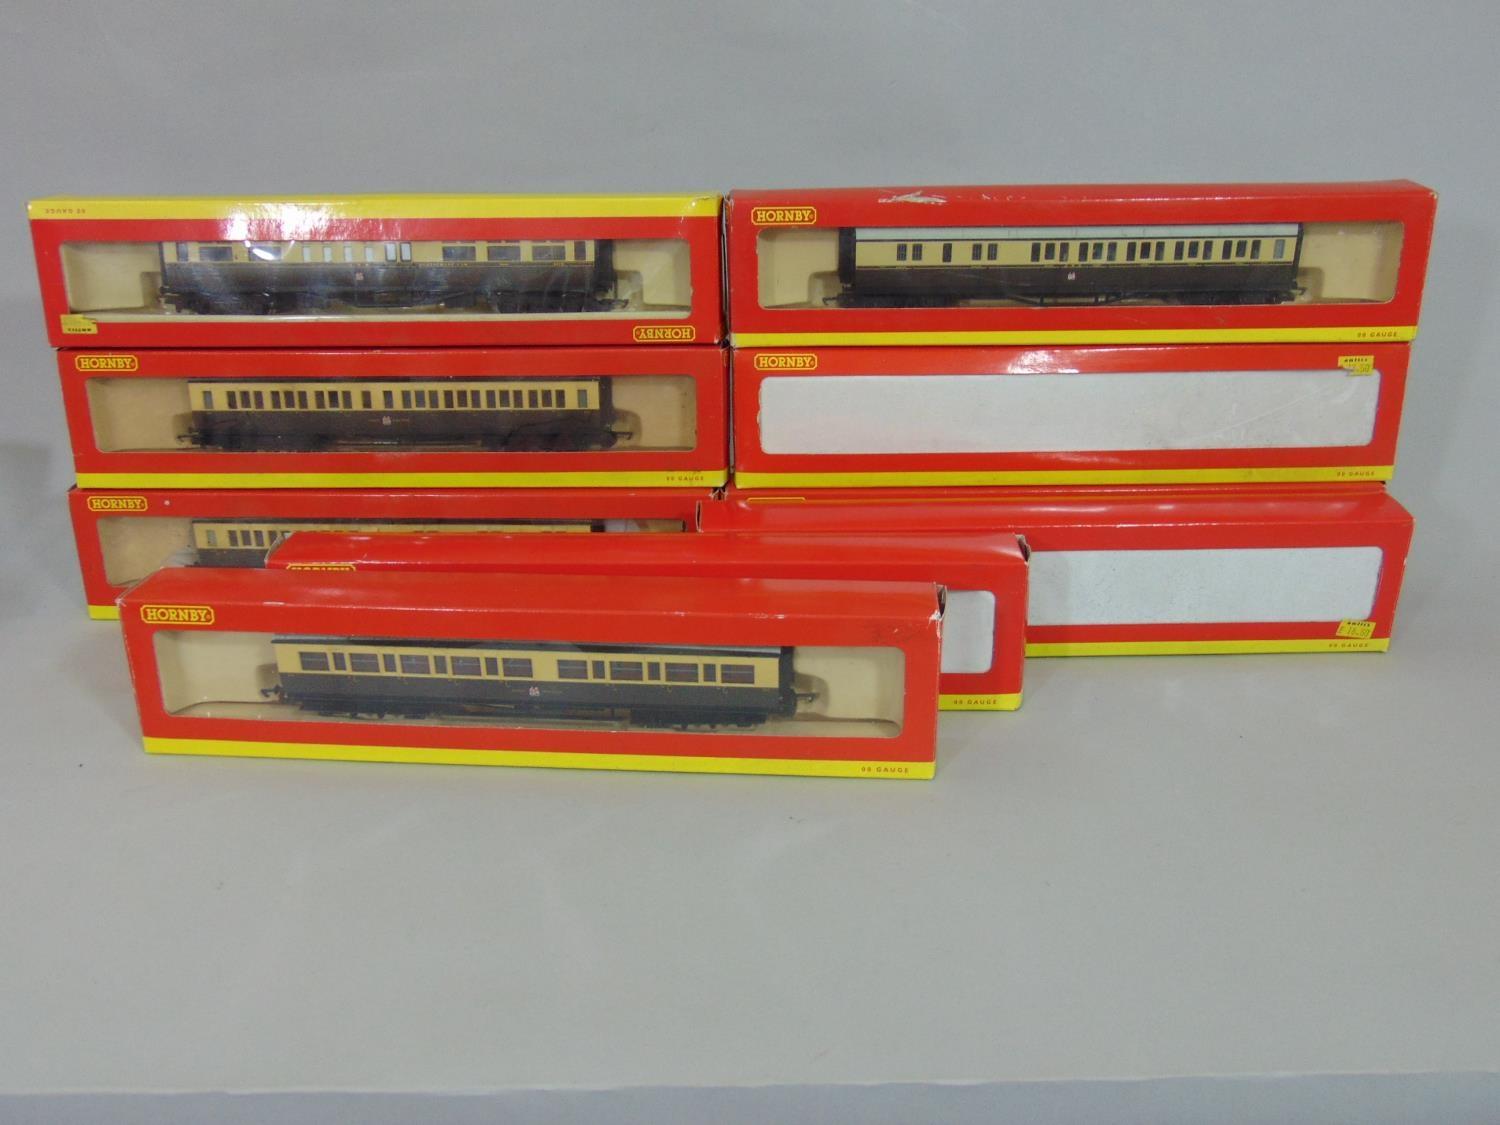 5 Hornby GWR Clerestory coaches and 4 GWR coaches all in chocolate/cream livery, in original